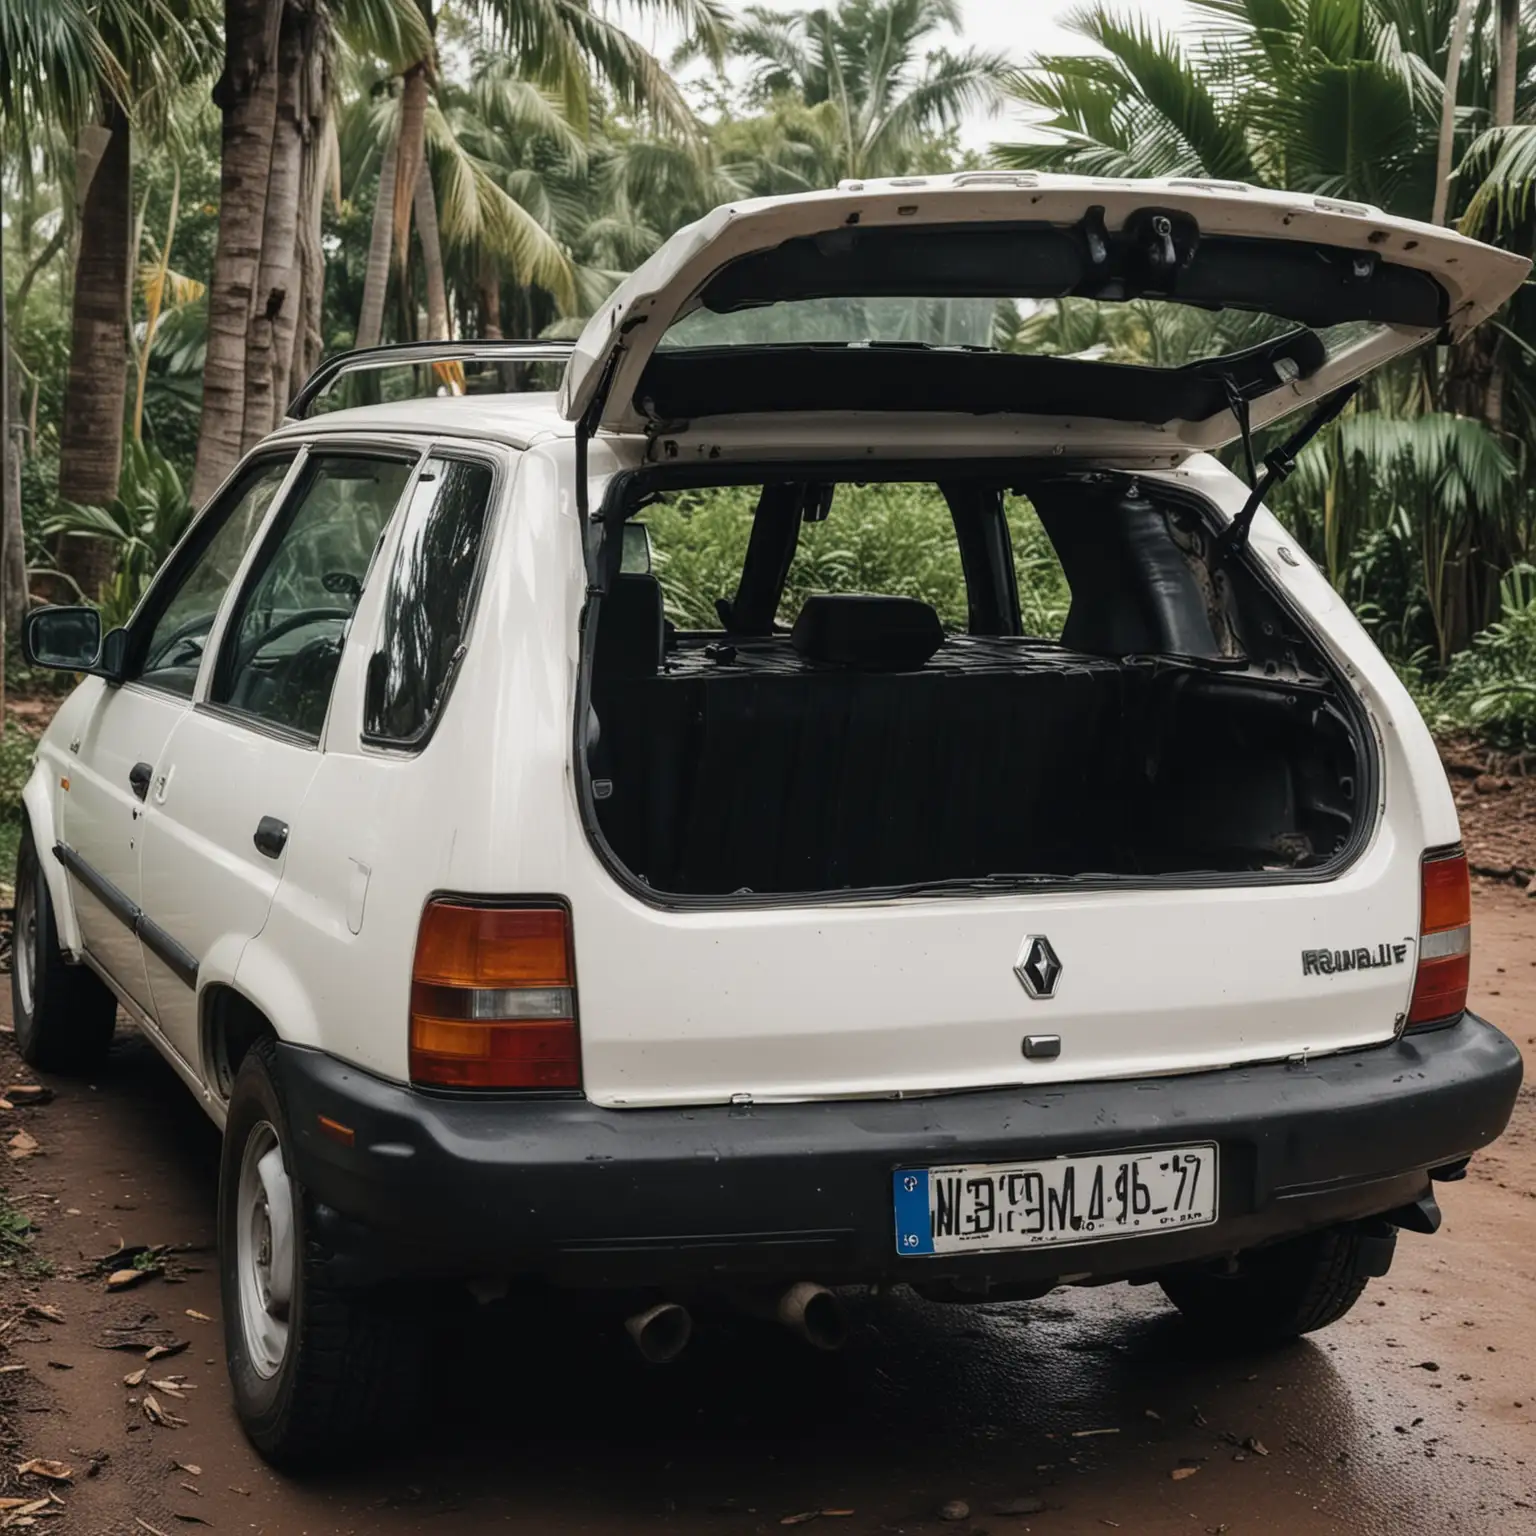 Mysterious Scene Arm Emerging from White Renault 19 Trunk in Gloomy Tropical Setting